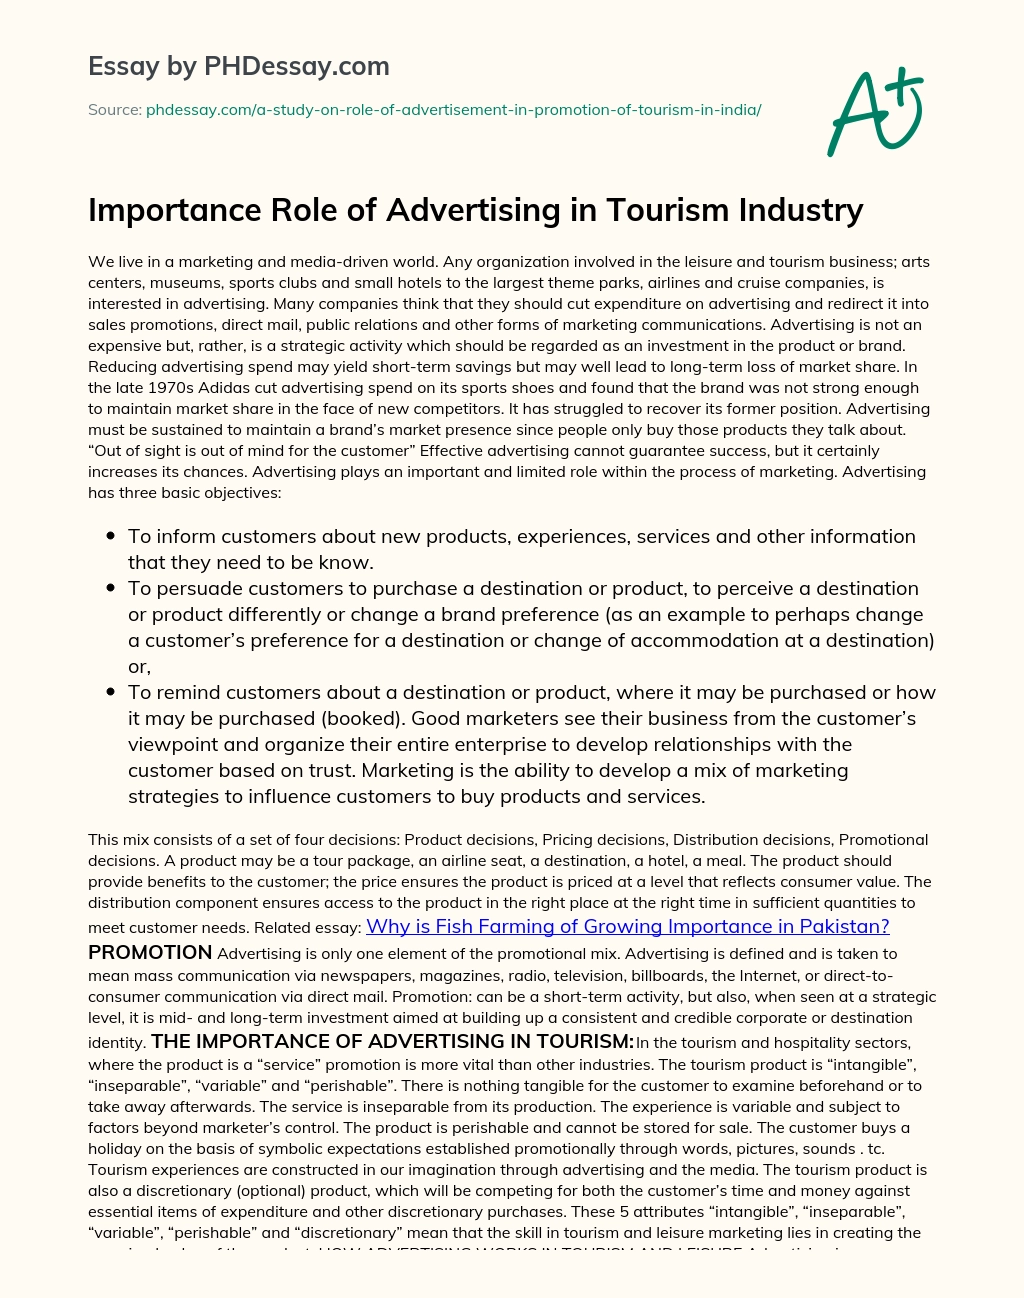 Importance Role of Advertising in Tourism Industry essay